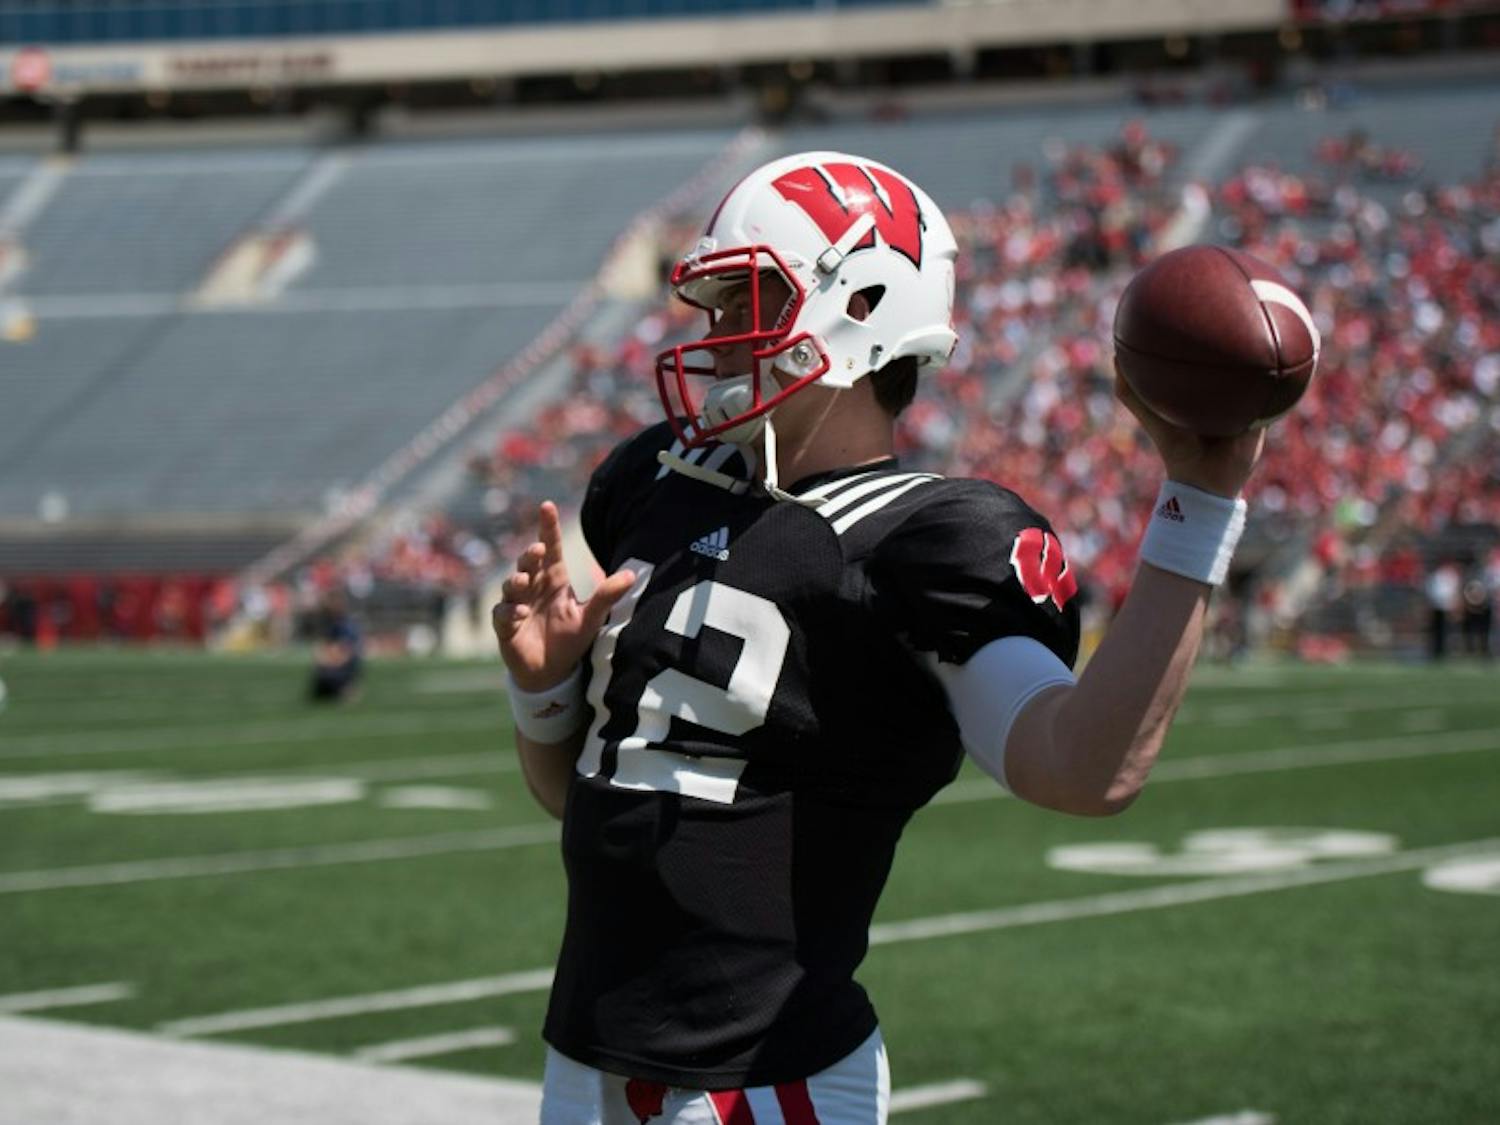 Alex Hornibrook might be the starting quarterback this week, but that doesn't make him Aaron Rodgers.